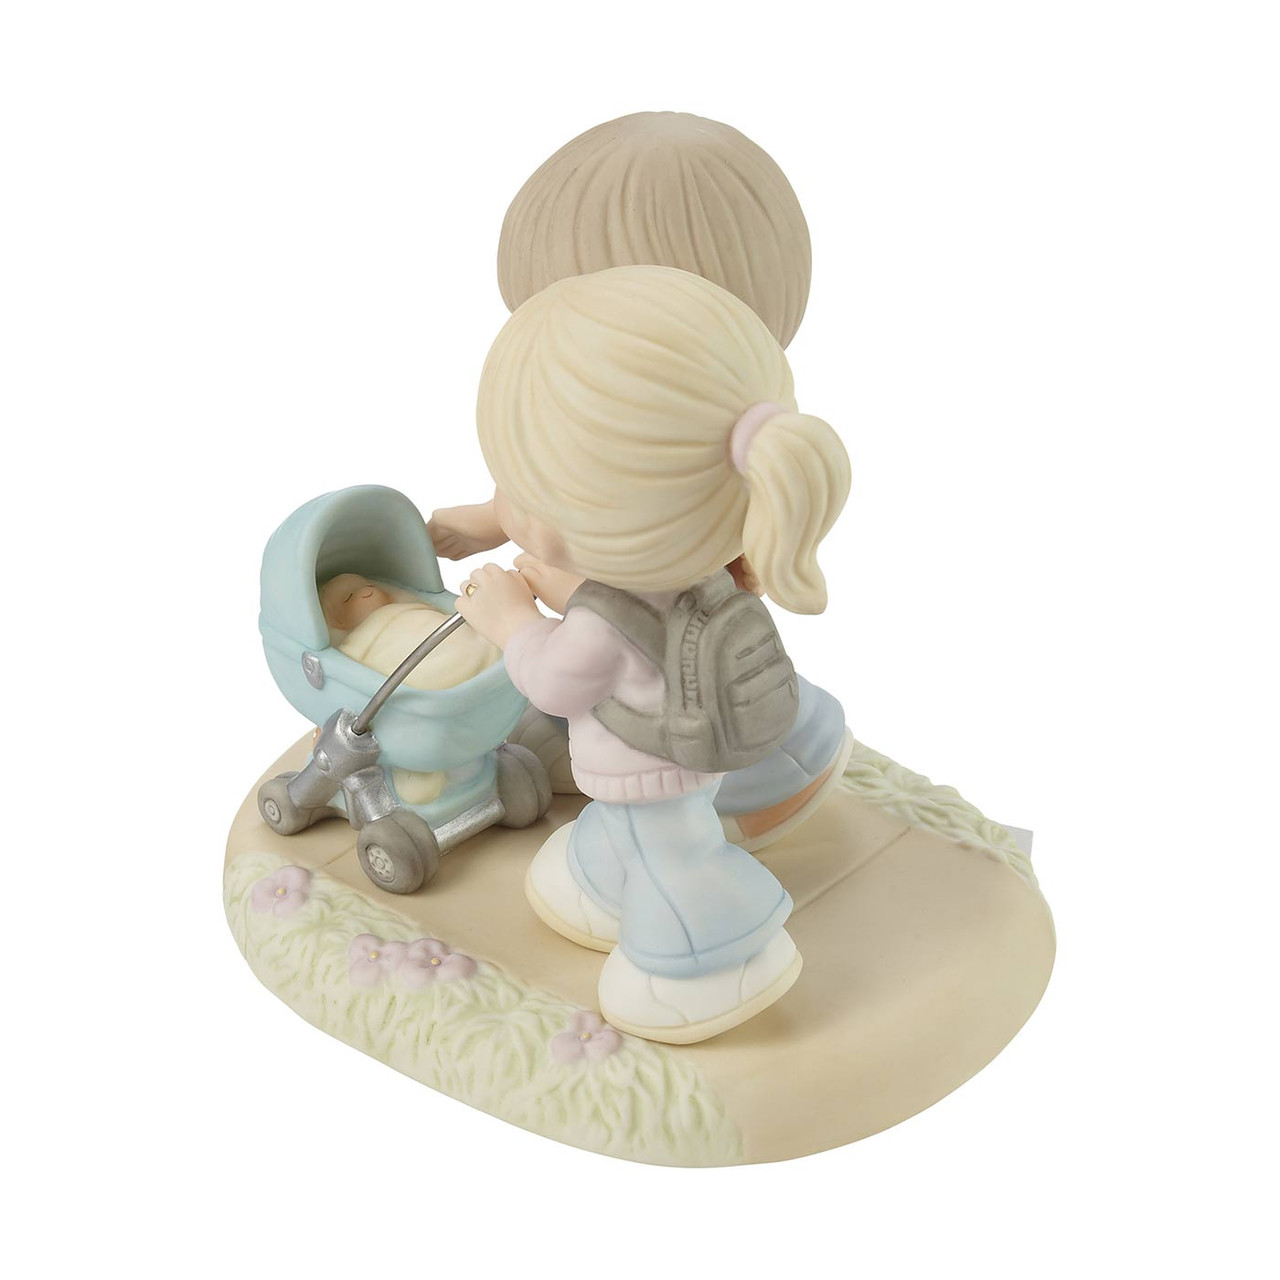 Engagement Gifts, “Will You Marry Me?”, Bisque Porcelain Figurine, #133022